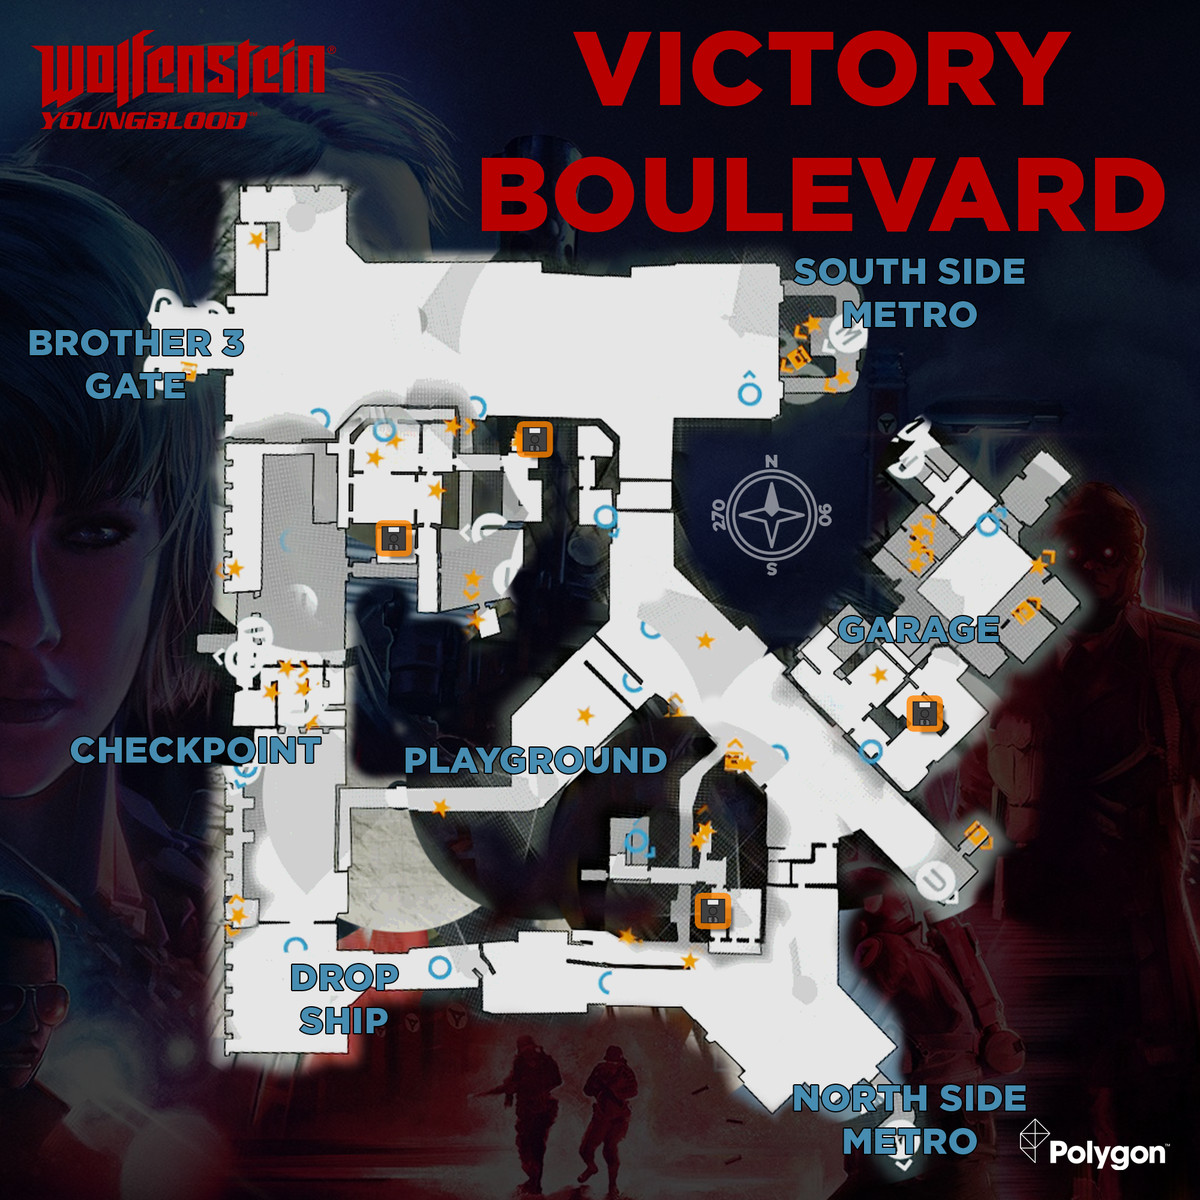 Wolfenstein: Youngblood Victory Boulevard map with Floppy Disk icons